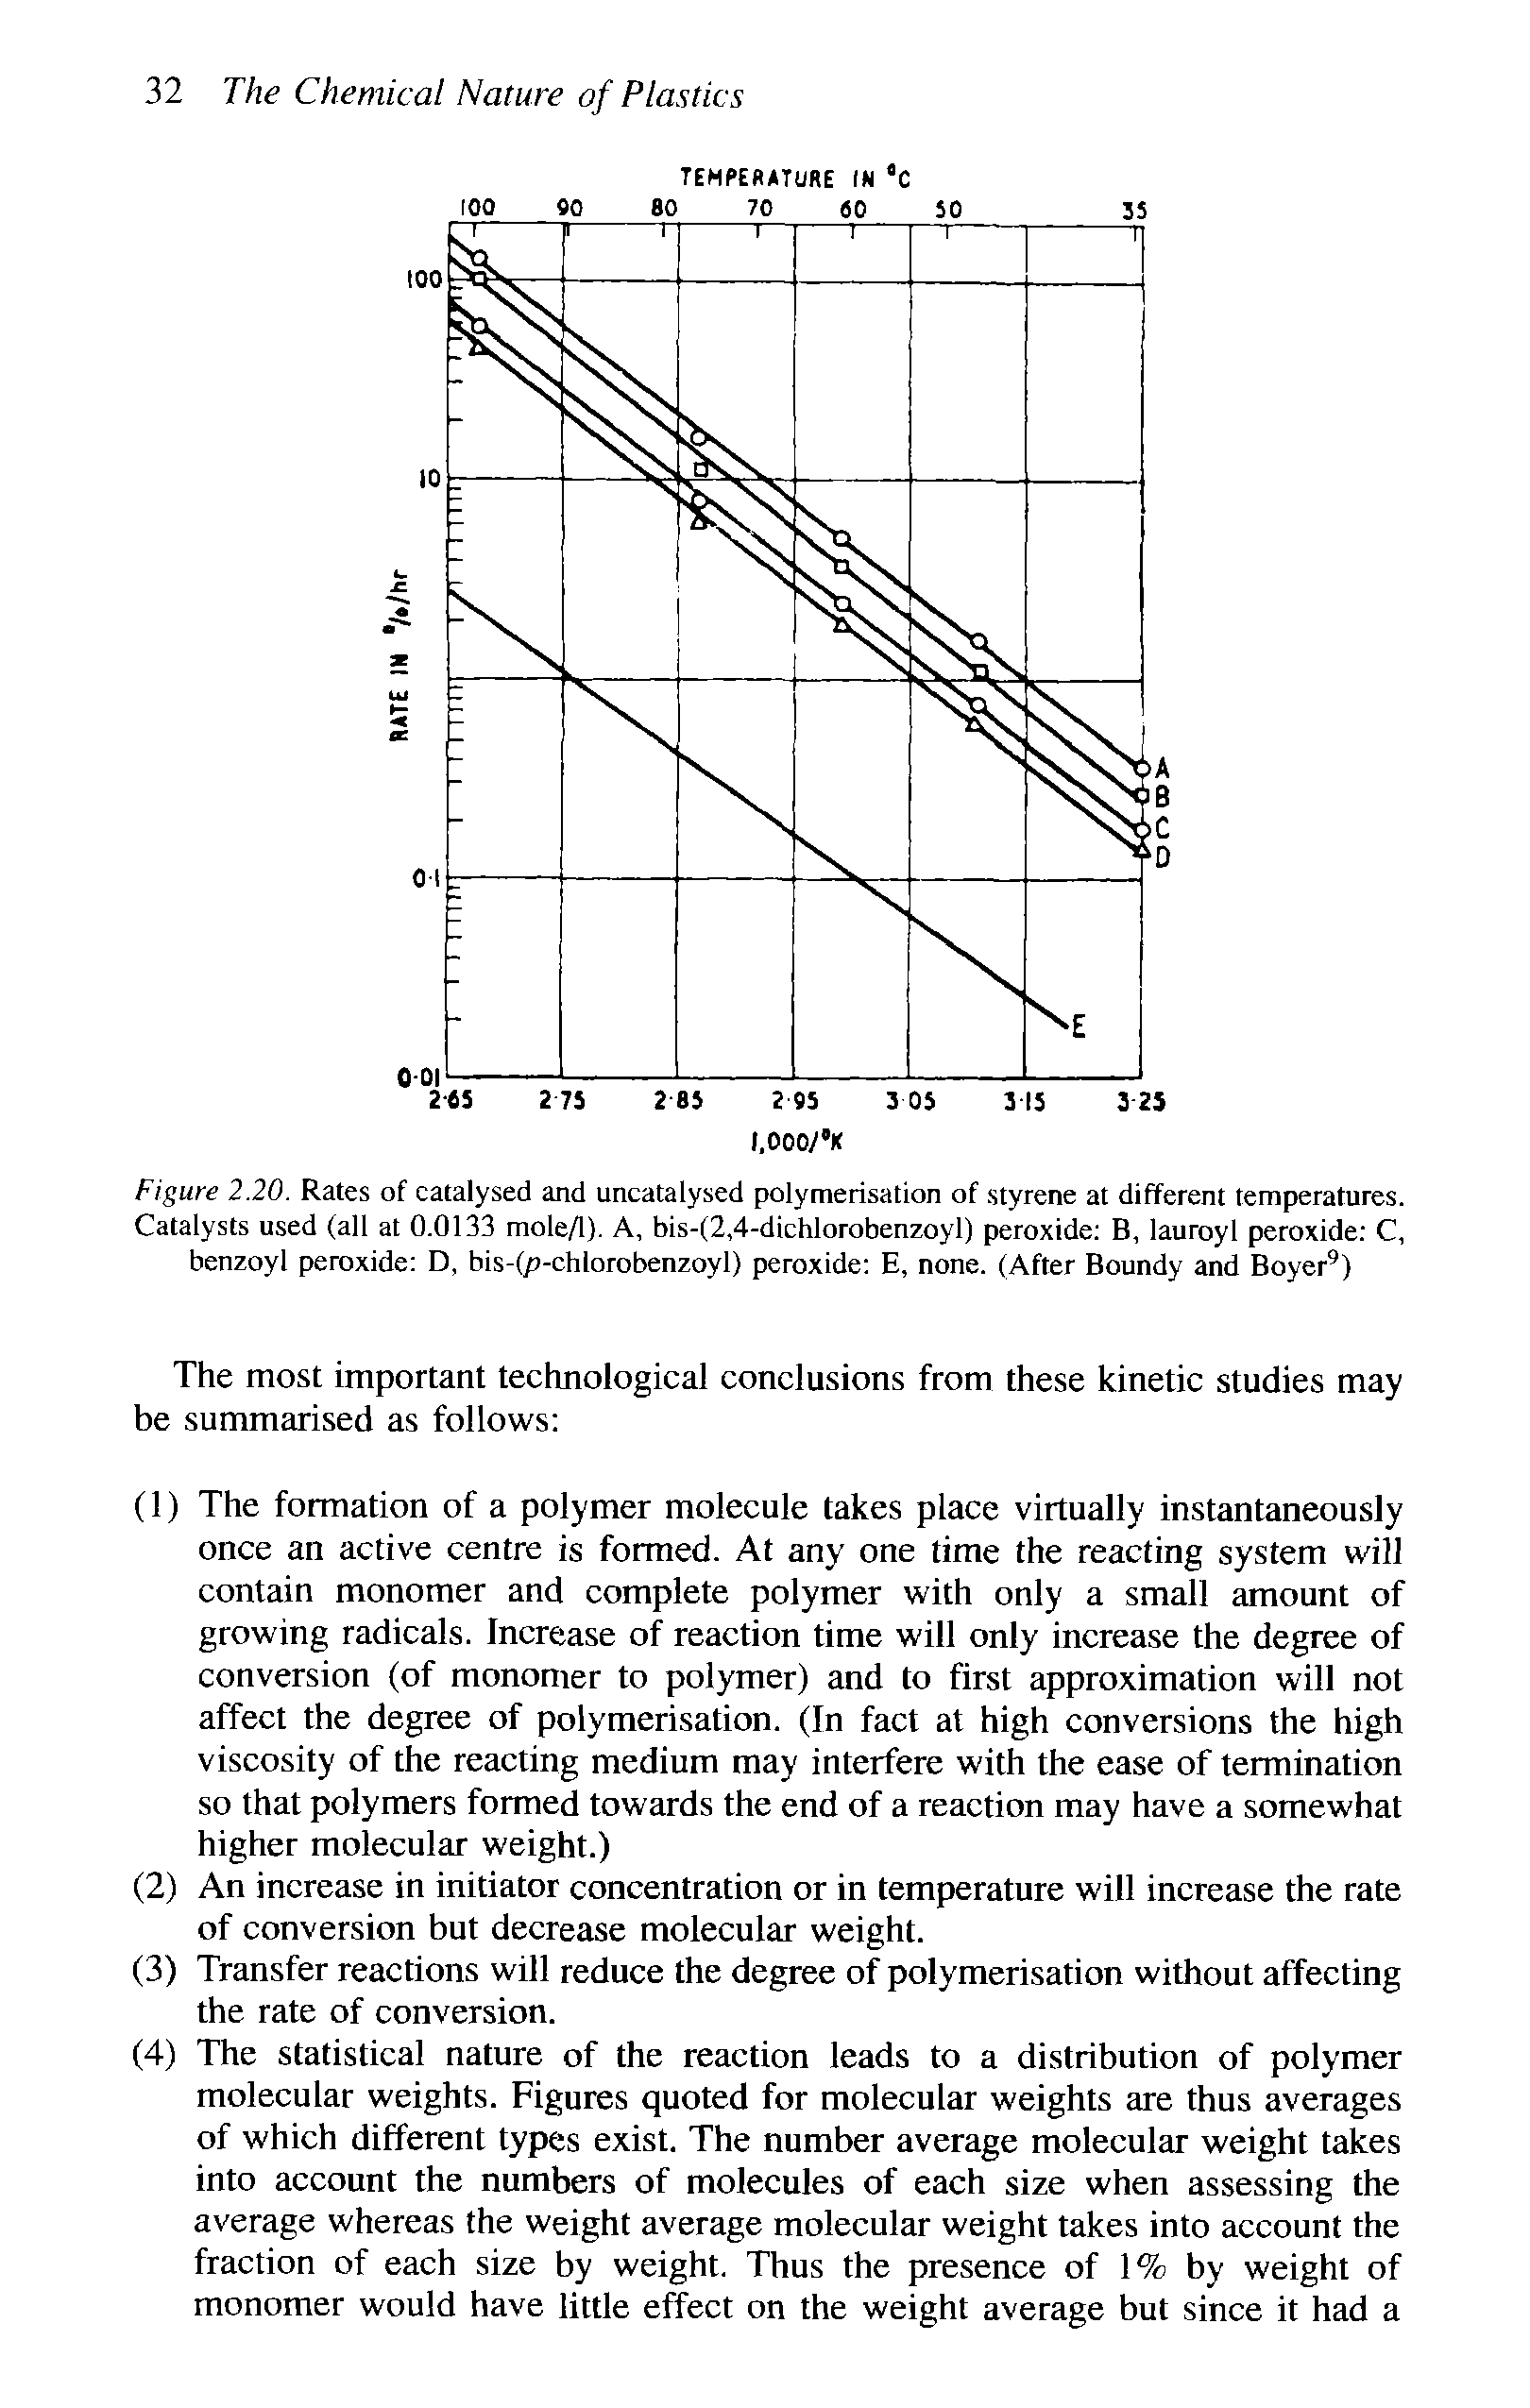 Figure 2.20. Rates of catalysed and uncatalysed polymerisation of styrene at different temperatures. Catalysts used (all at 0.0133 moleA). A, bis-(2,4-dichlorobenzoyl) peroxide B, lauroyl peroxide C, benzoyl peroxide D, bis-(/)-chlorobenzoyl) peroxide E, none. (After Boundy and Boyer )...